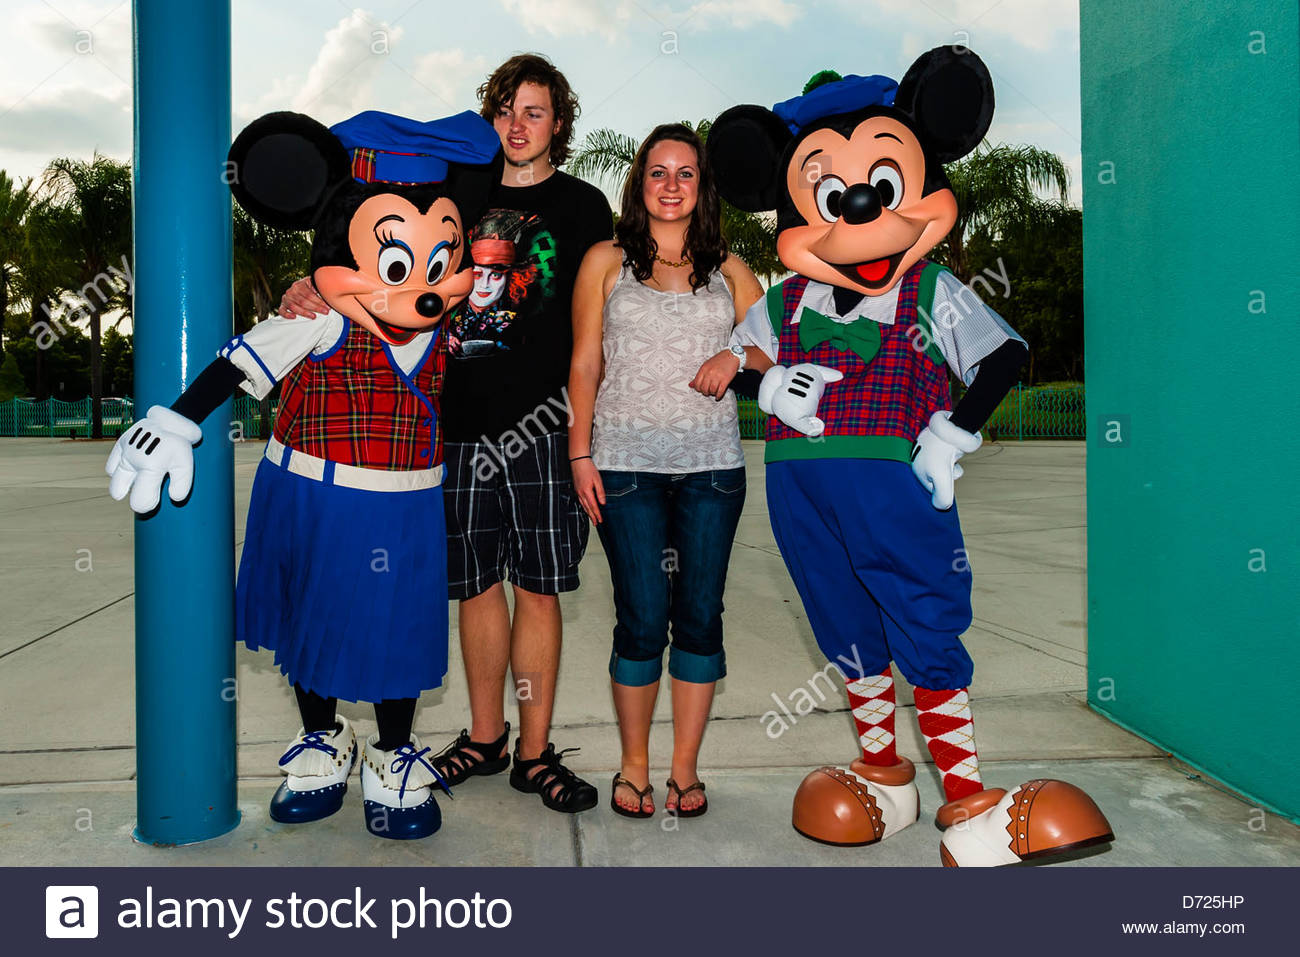 Mickey Mouse And Minnie Mouse With Teenagers Fantasia Gardens